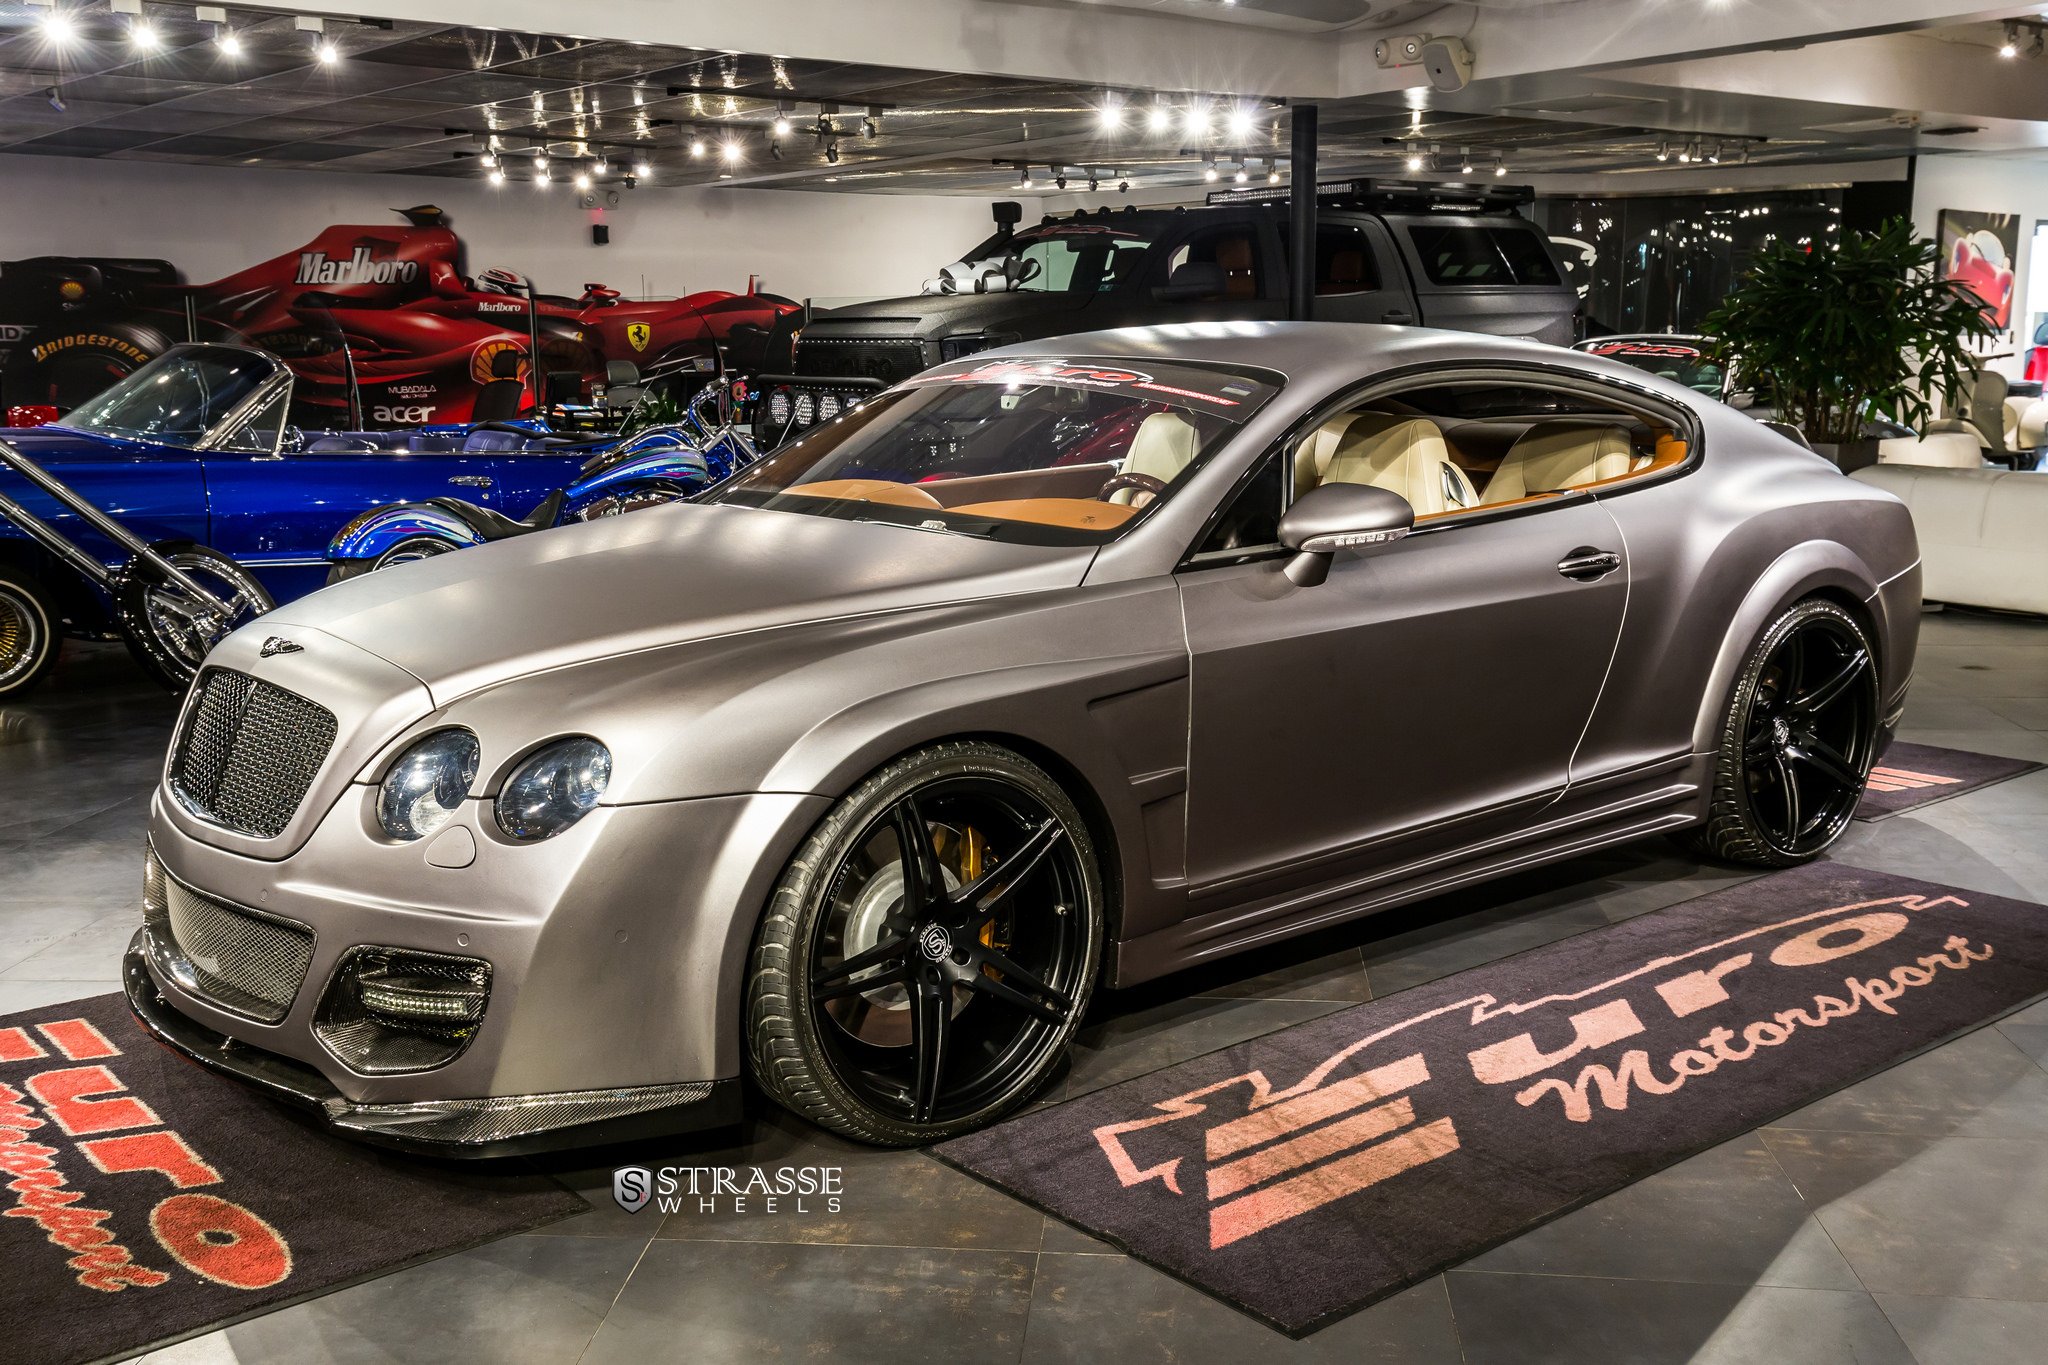 strasse, Wheels, Wide, Body, Bentley gt, Continental, Coupe, Cars Wallpaper